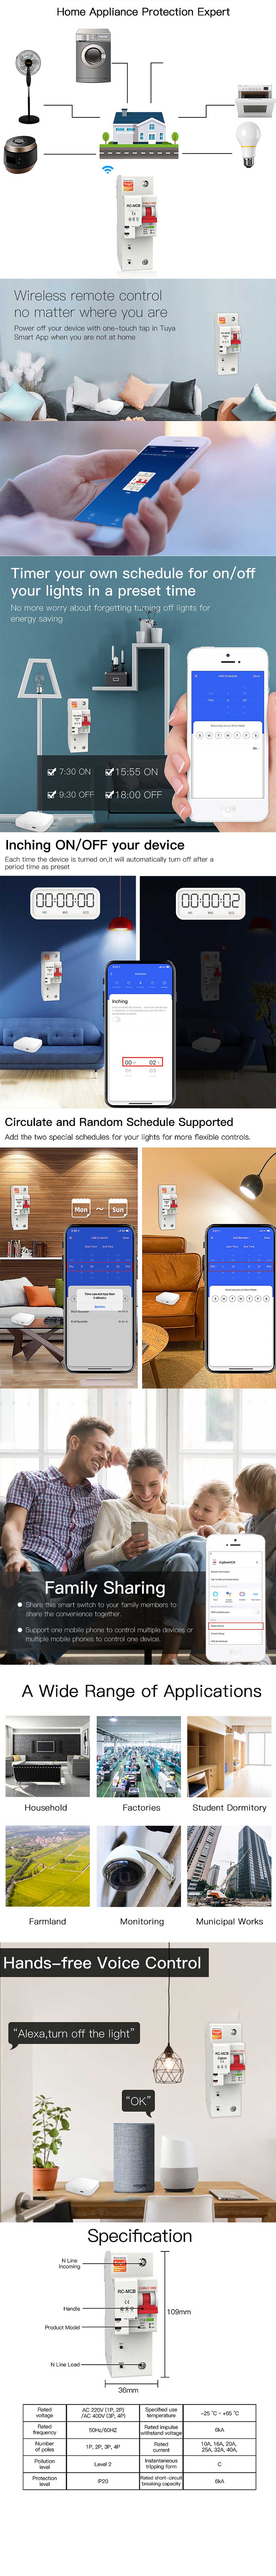 MoesHouse Tuya 80A 2P Smart WiFi Circuit Breaker APP Remote Control Schedule Setting Voice Control Compatible With Alexa Google Home